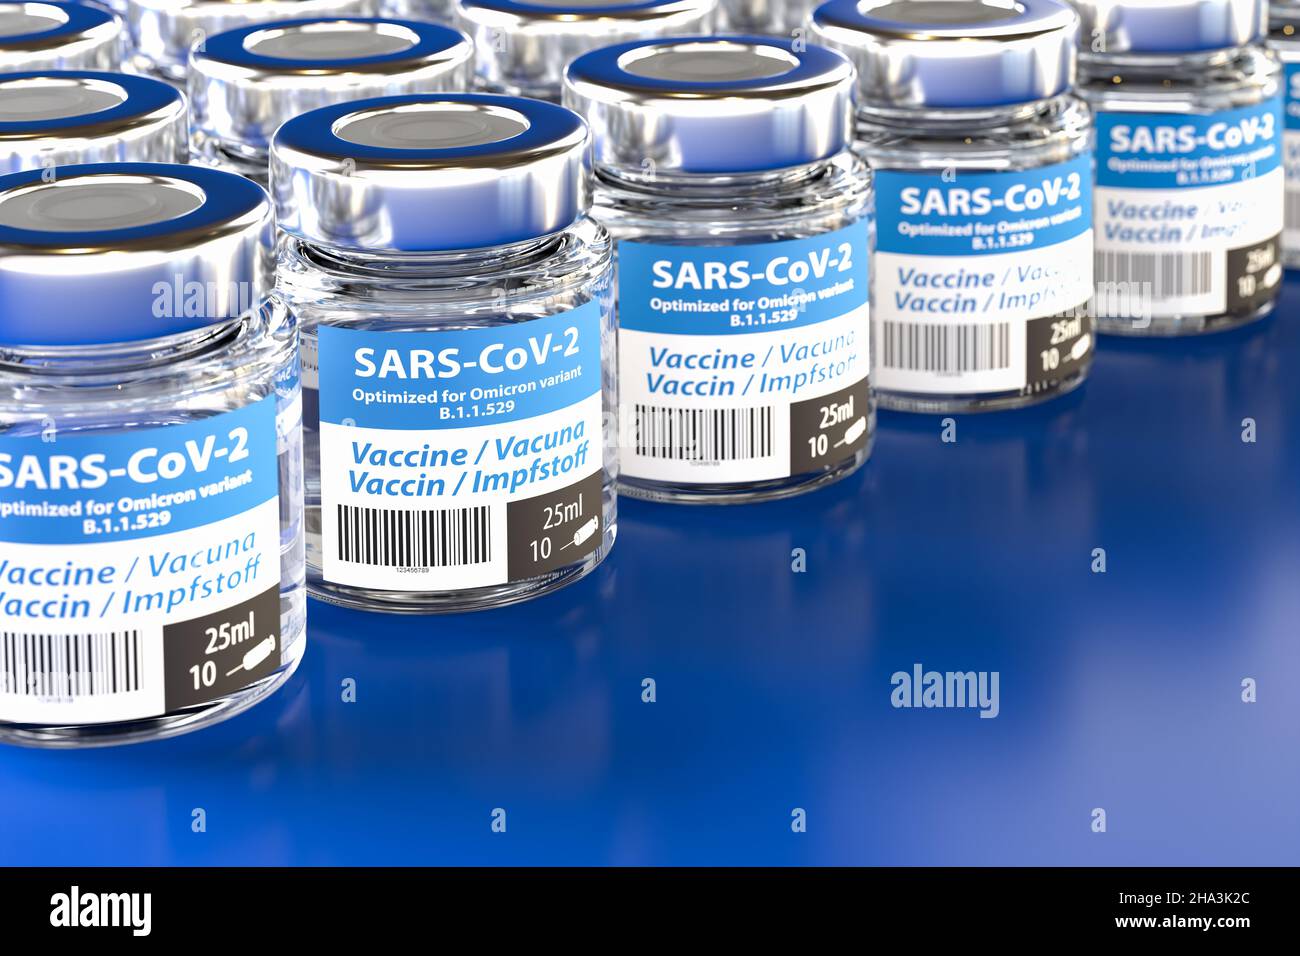 A Vaccine against the SARS-CoV-2 variant B.1.1.529 Omicron: Bottles of vaccination. The word vaccination in English, Spanish, French and German on the Stock Photo